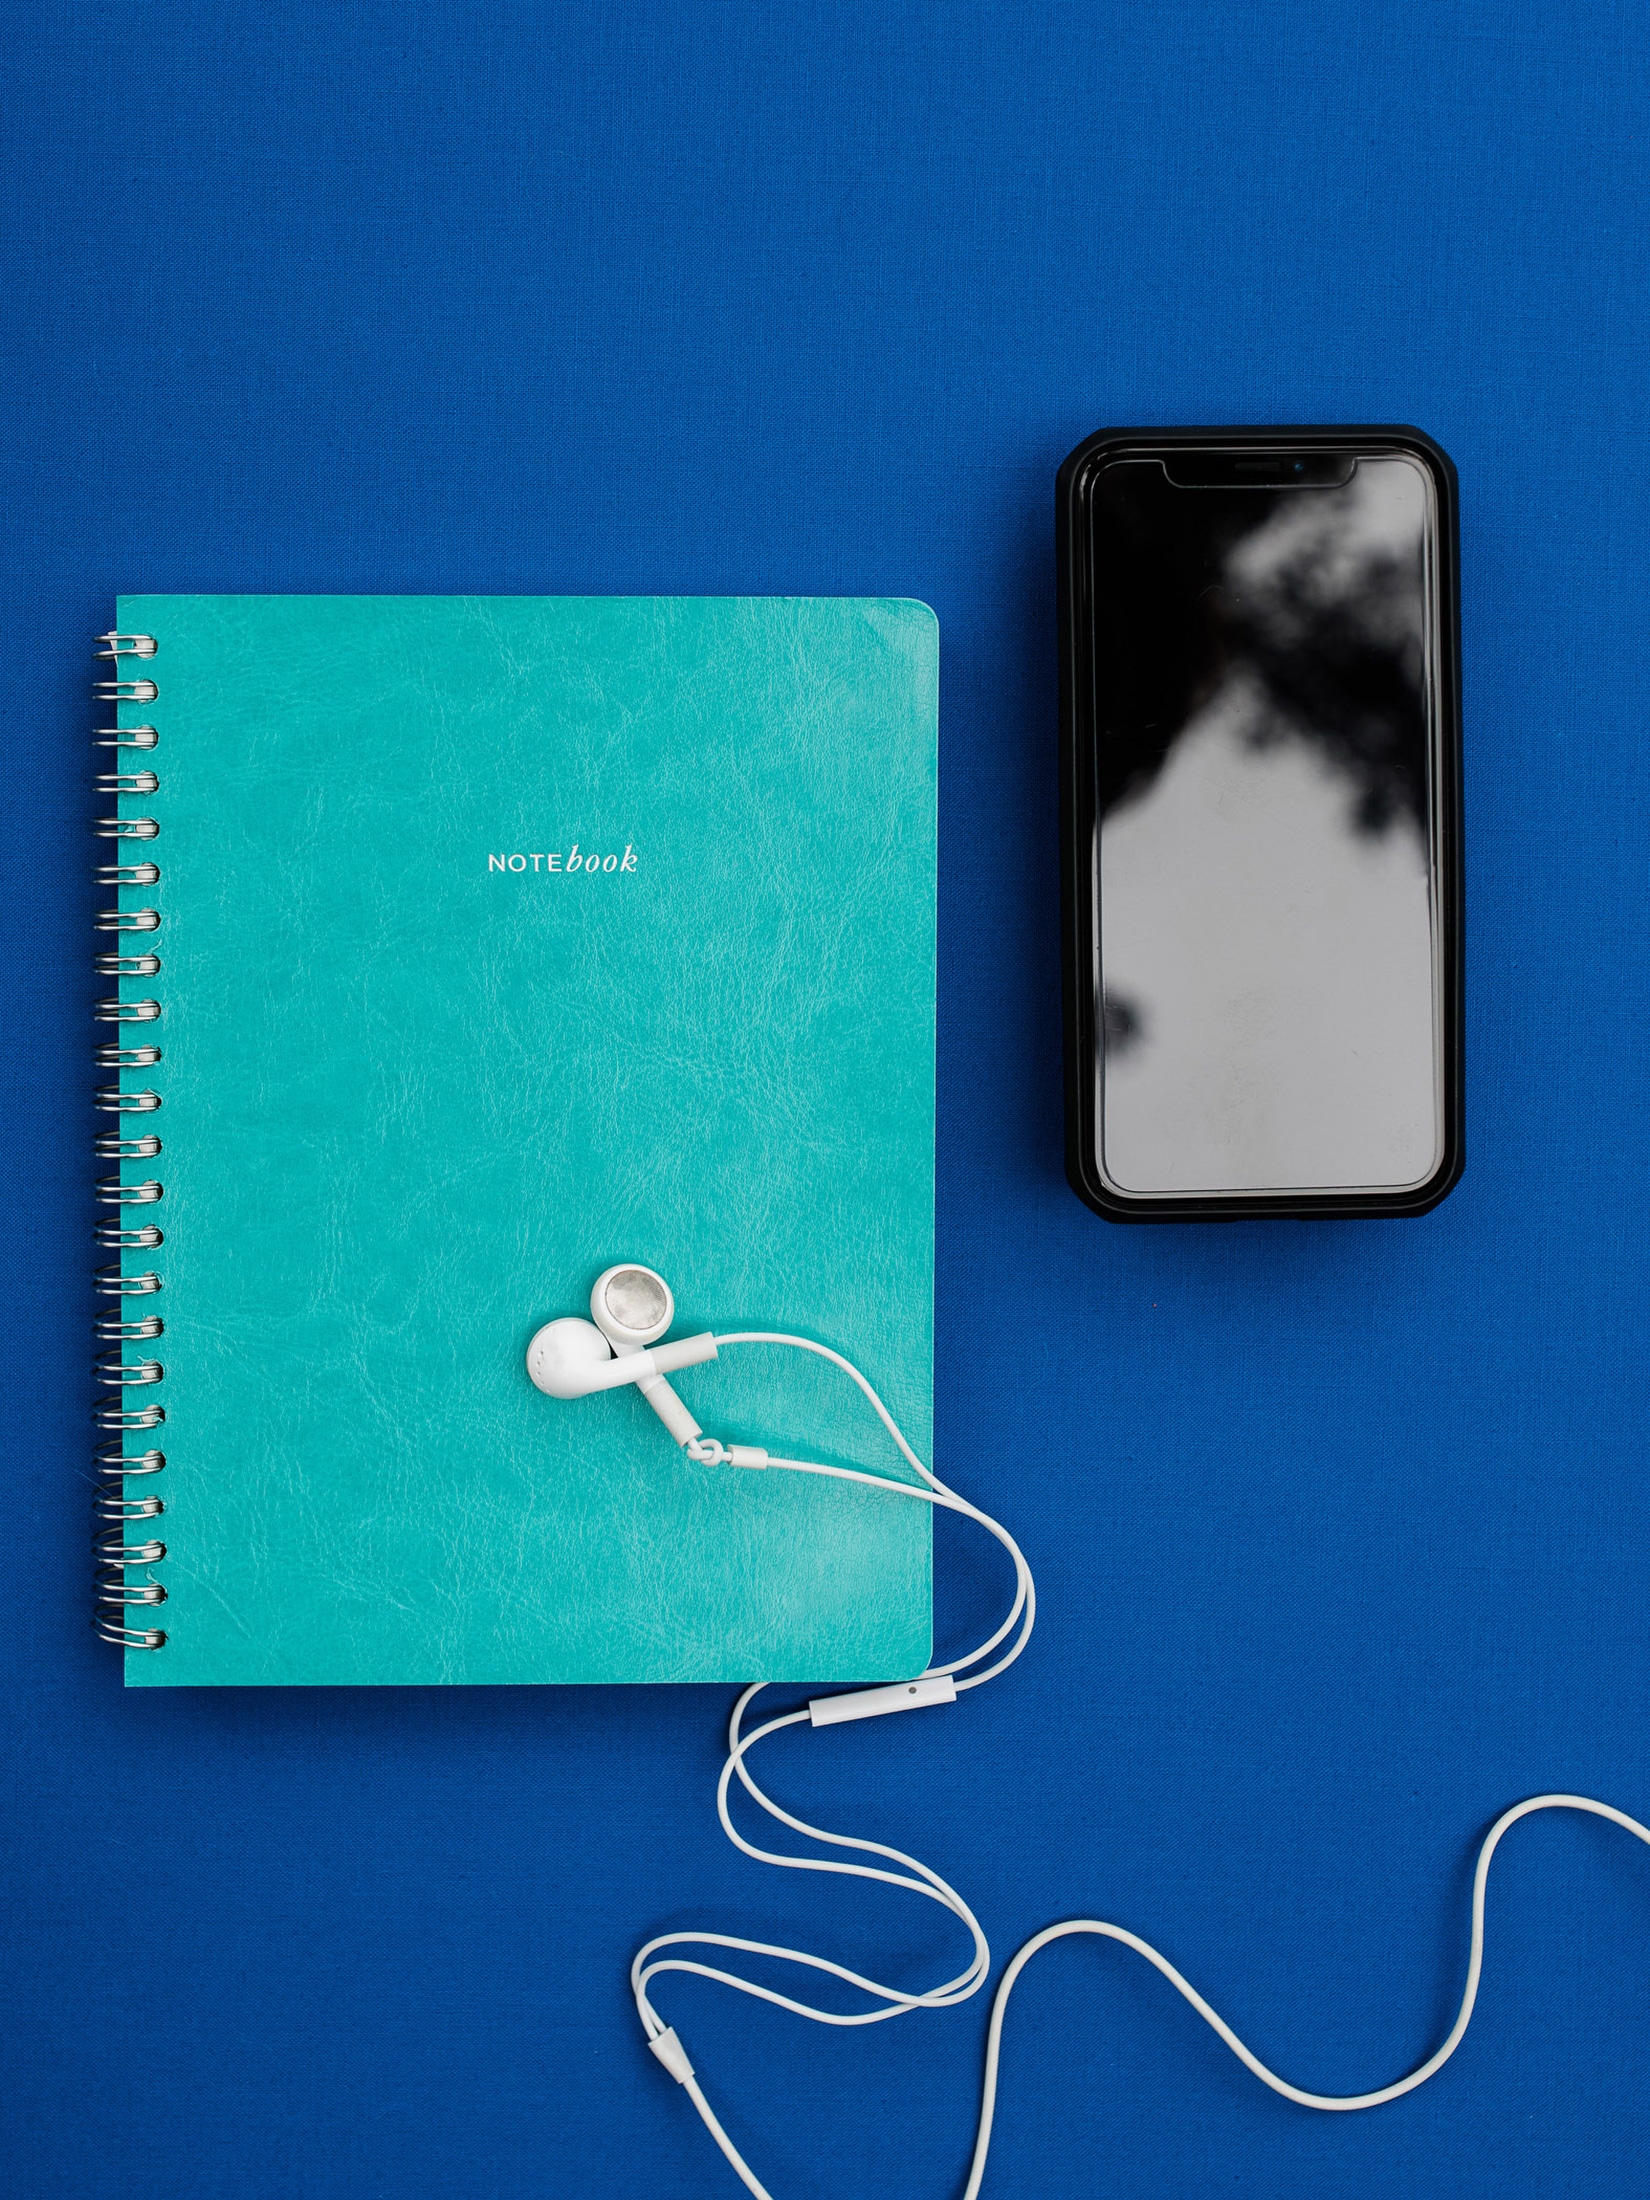 Top 5 motivational podcasts for business in 2019